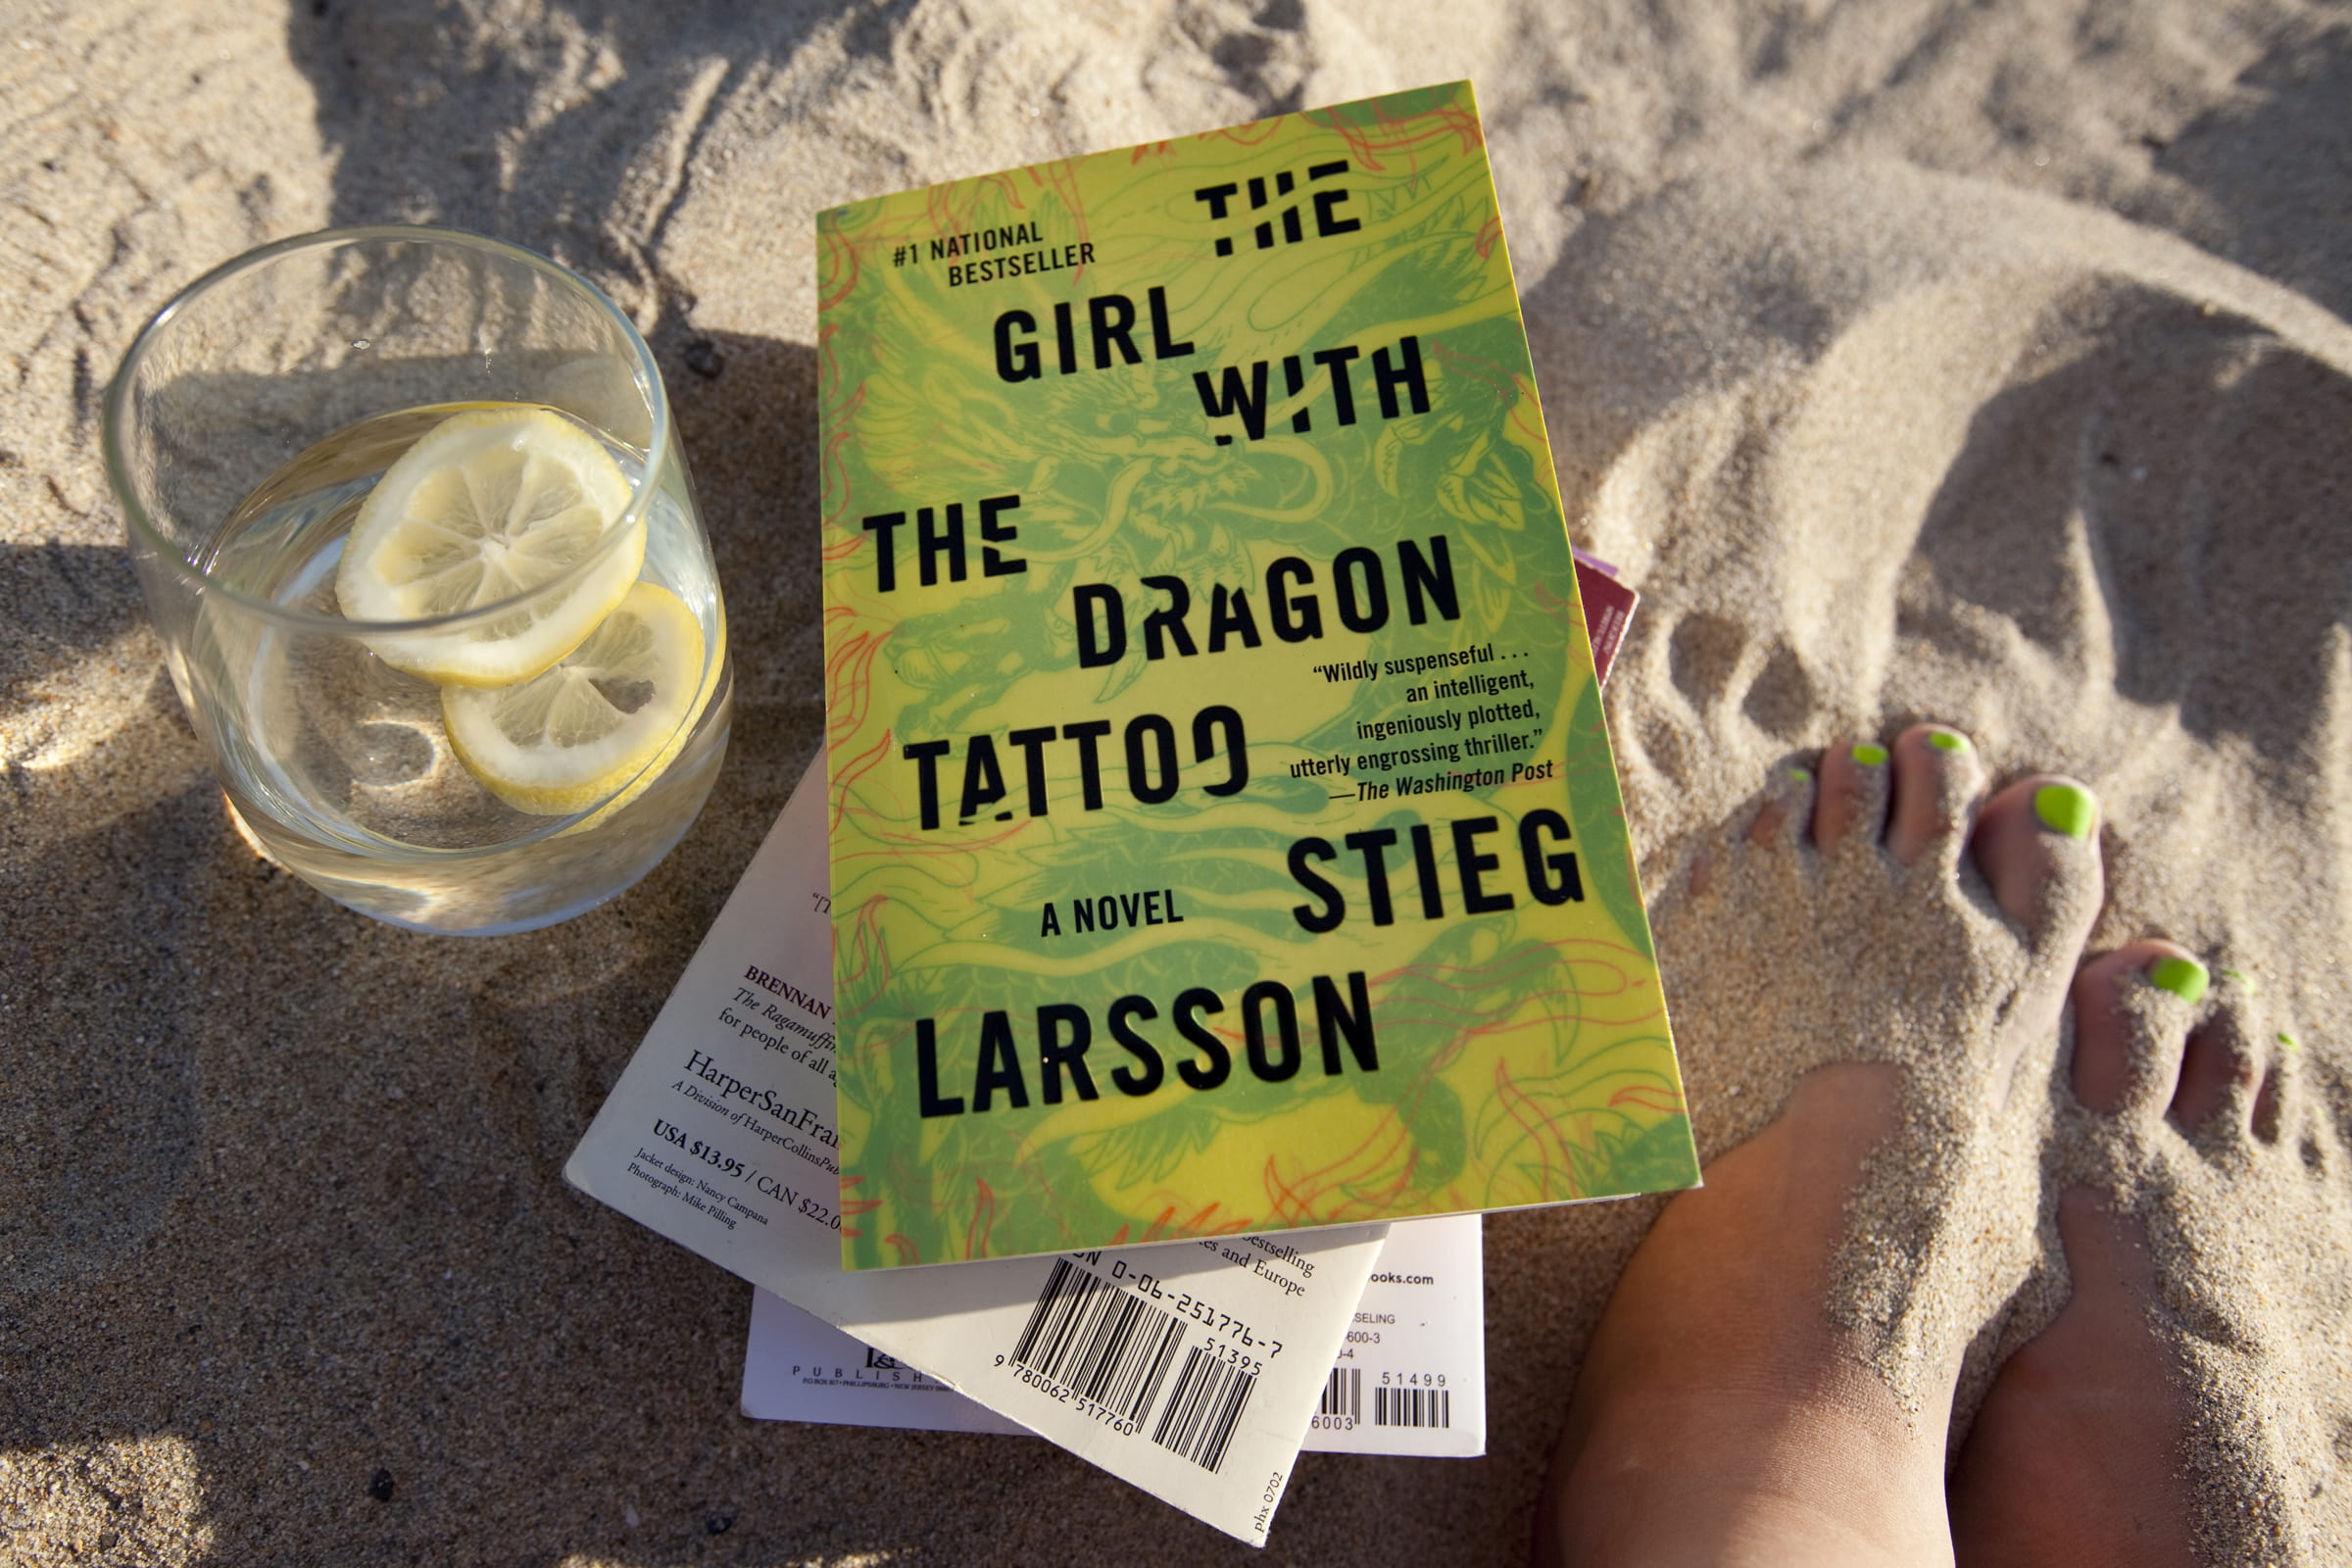 "Girl With The Dragon Tattoo" book sitting in the sand